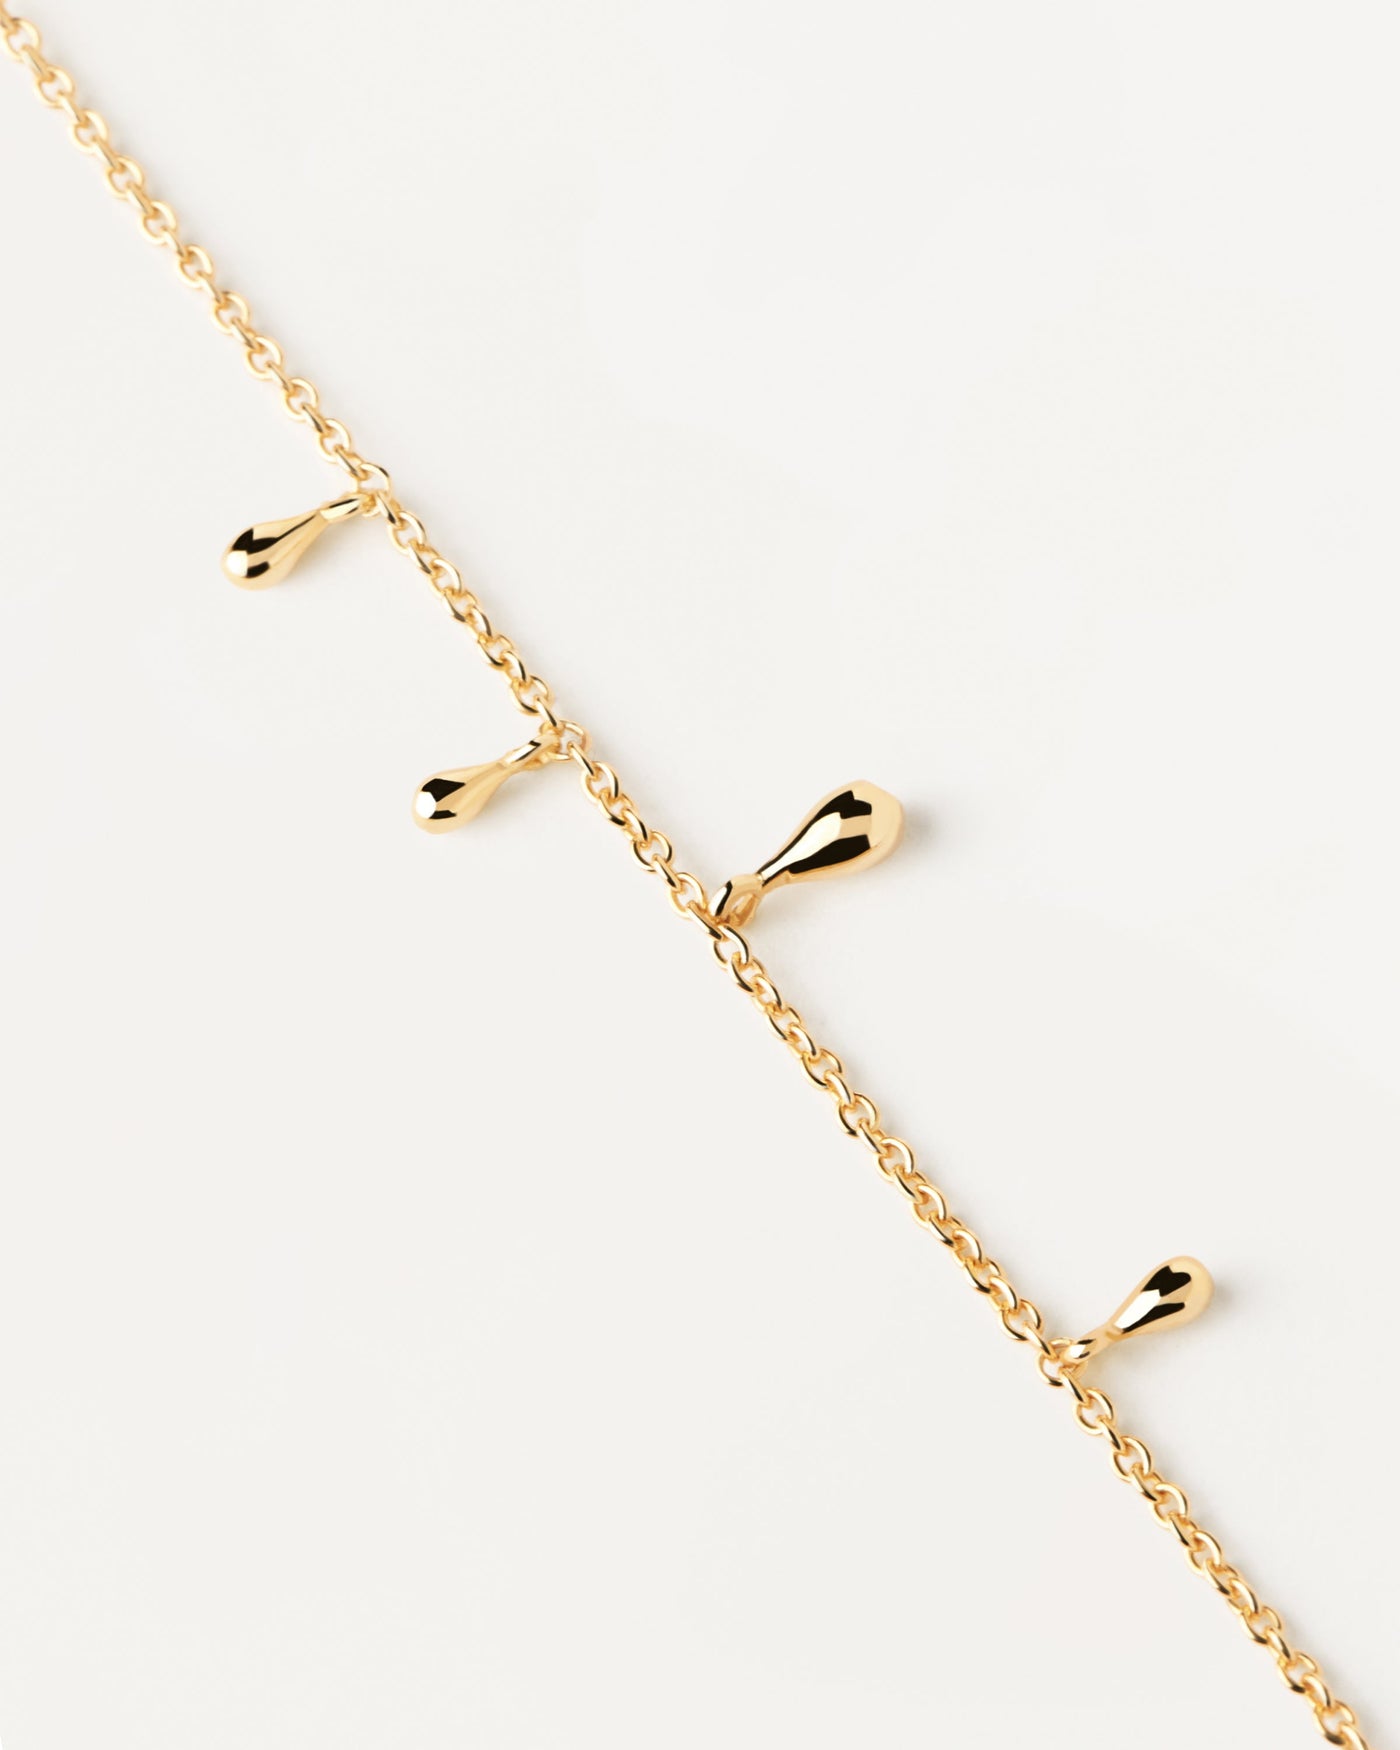 2023 Selection | Teardrop Bracelet. Gold-plated silver bracelet with small drop pendants. Get the latest arrival from PDPAOLA. Place your order safely and get this Best Seller. Free Shipping.